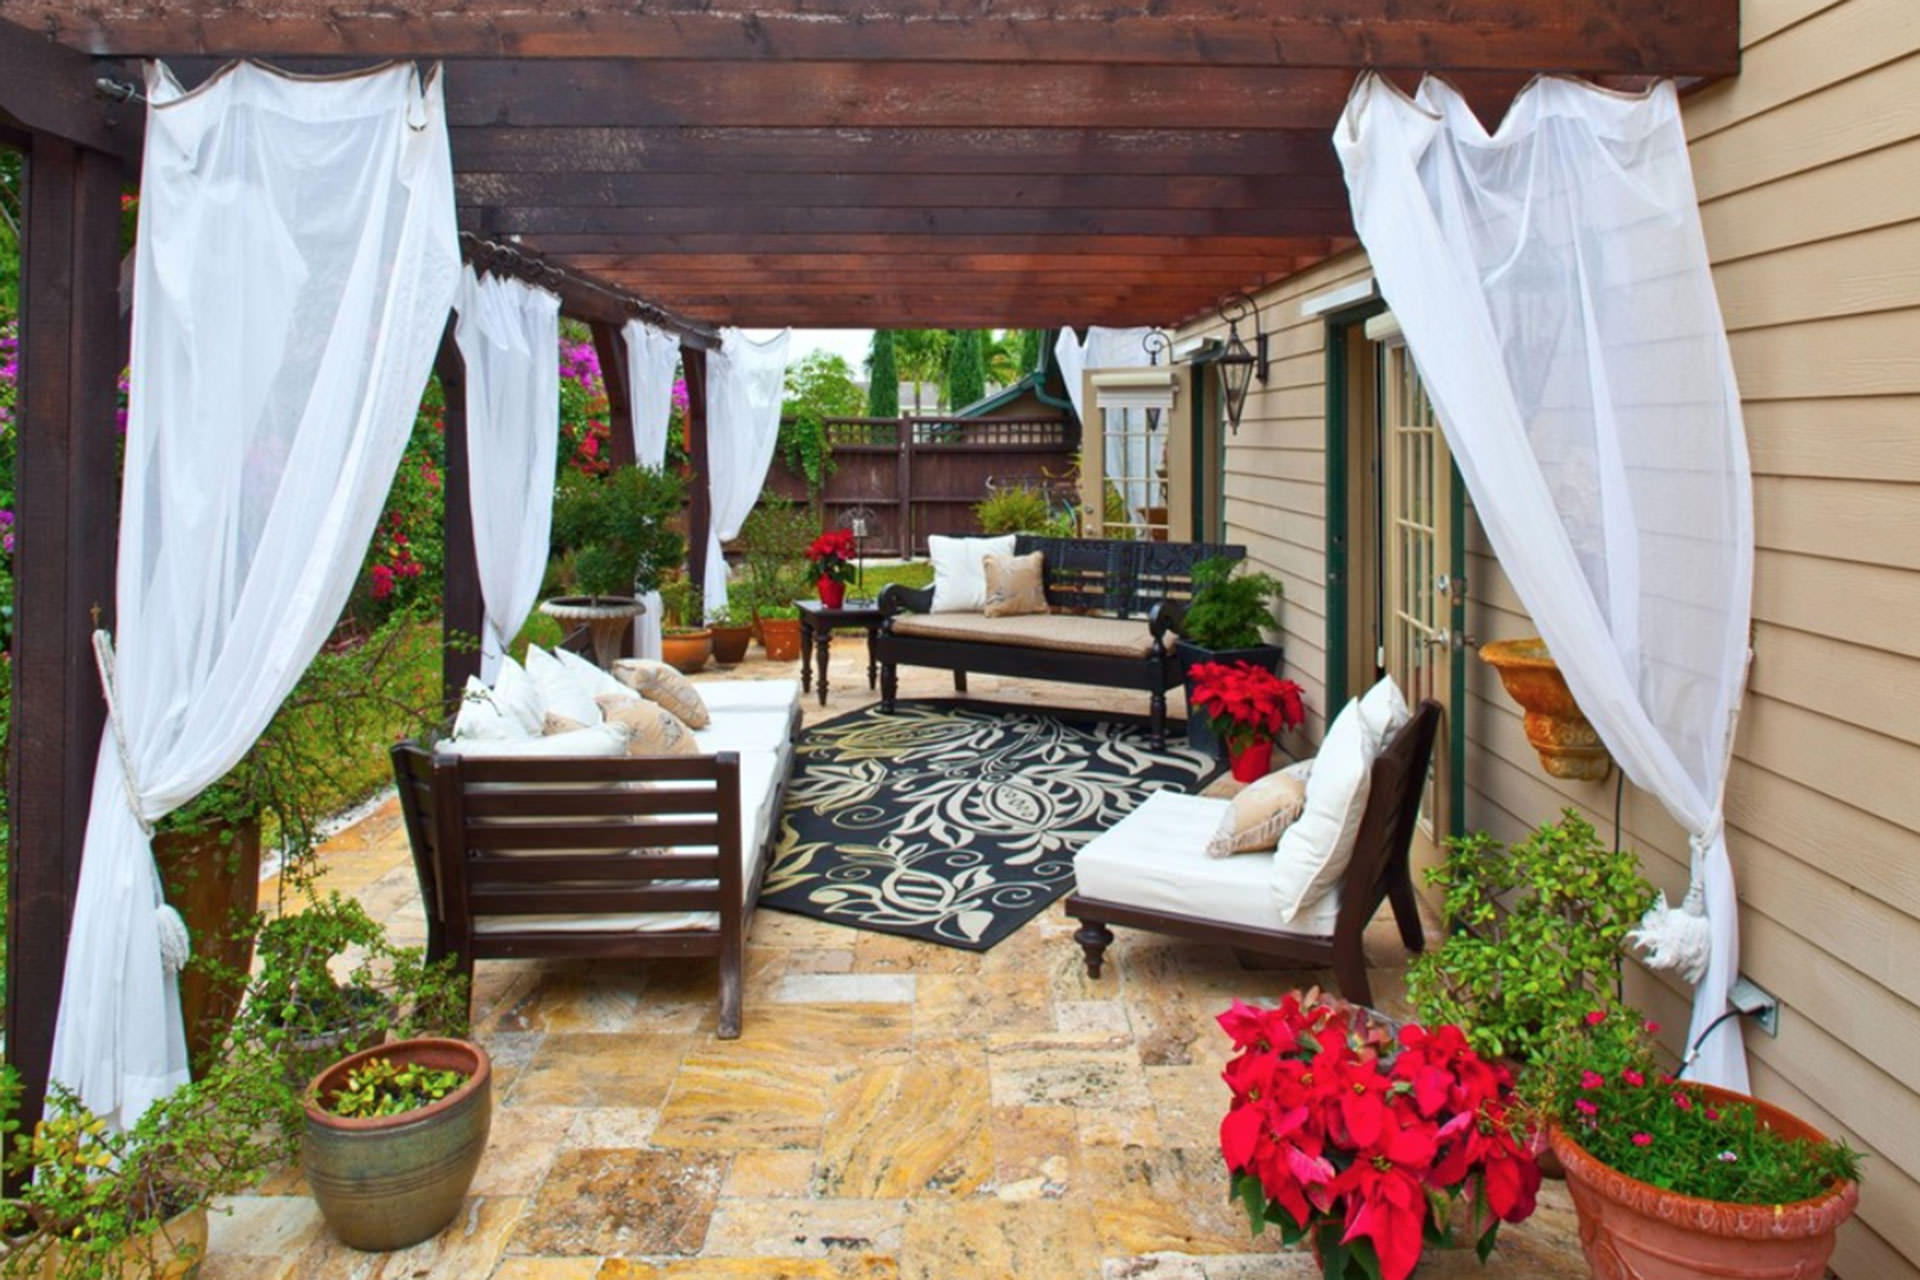 Outdoor Curtains in Backyard Deck